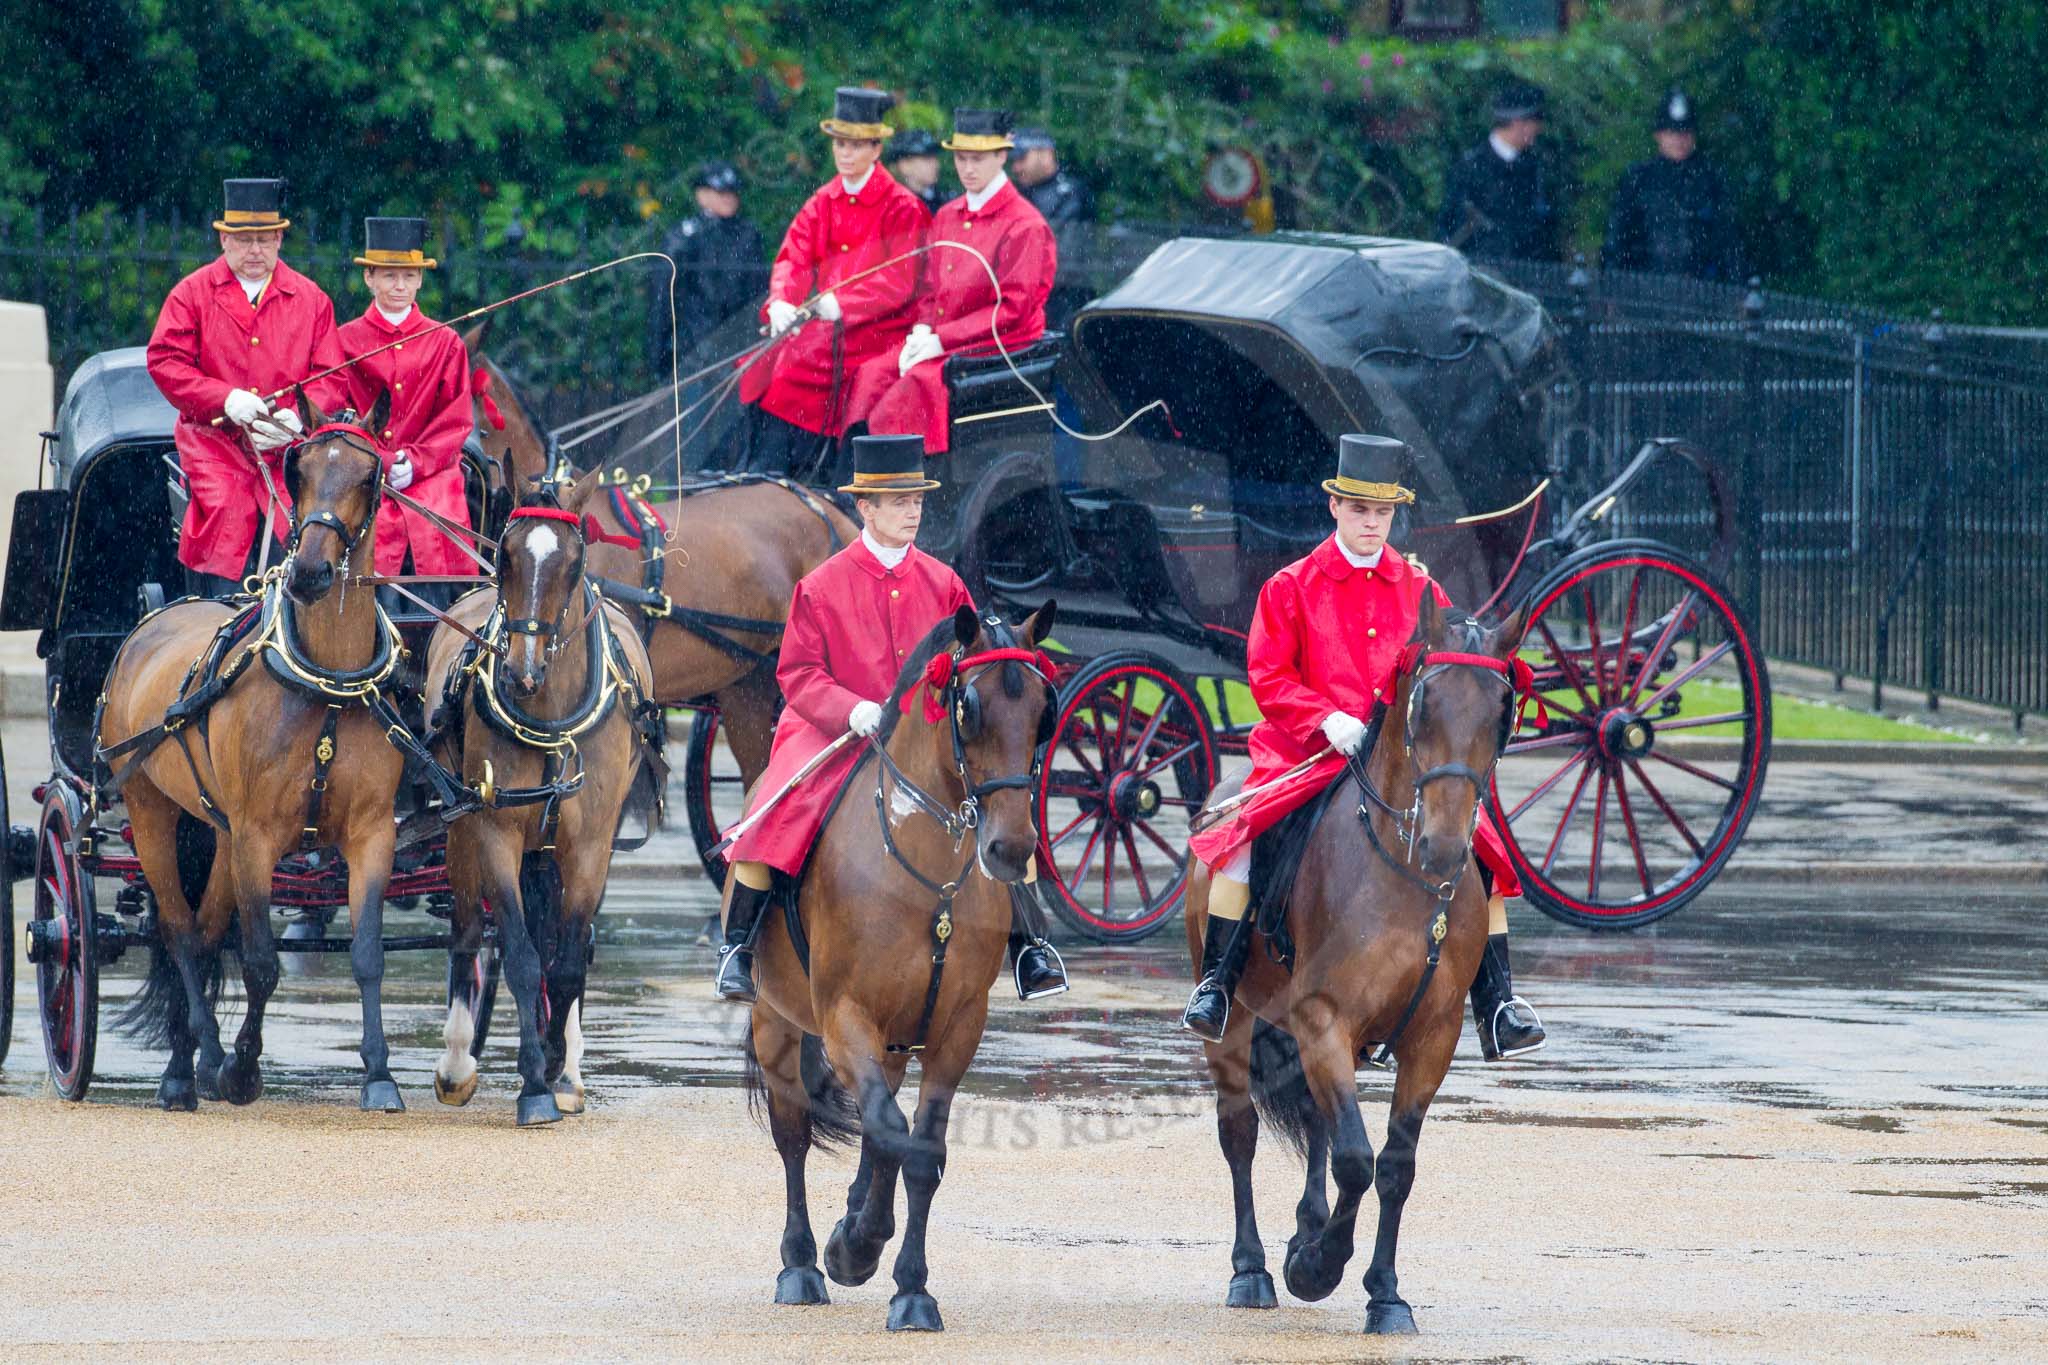 The Colonel's Review 2014.
Horse Guards Parade, Westminster,
London,

United Kingdom,
on 07 June 2014 at 10:50, image #202